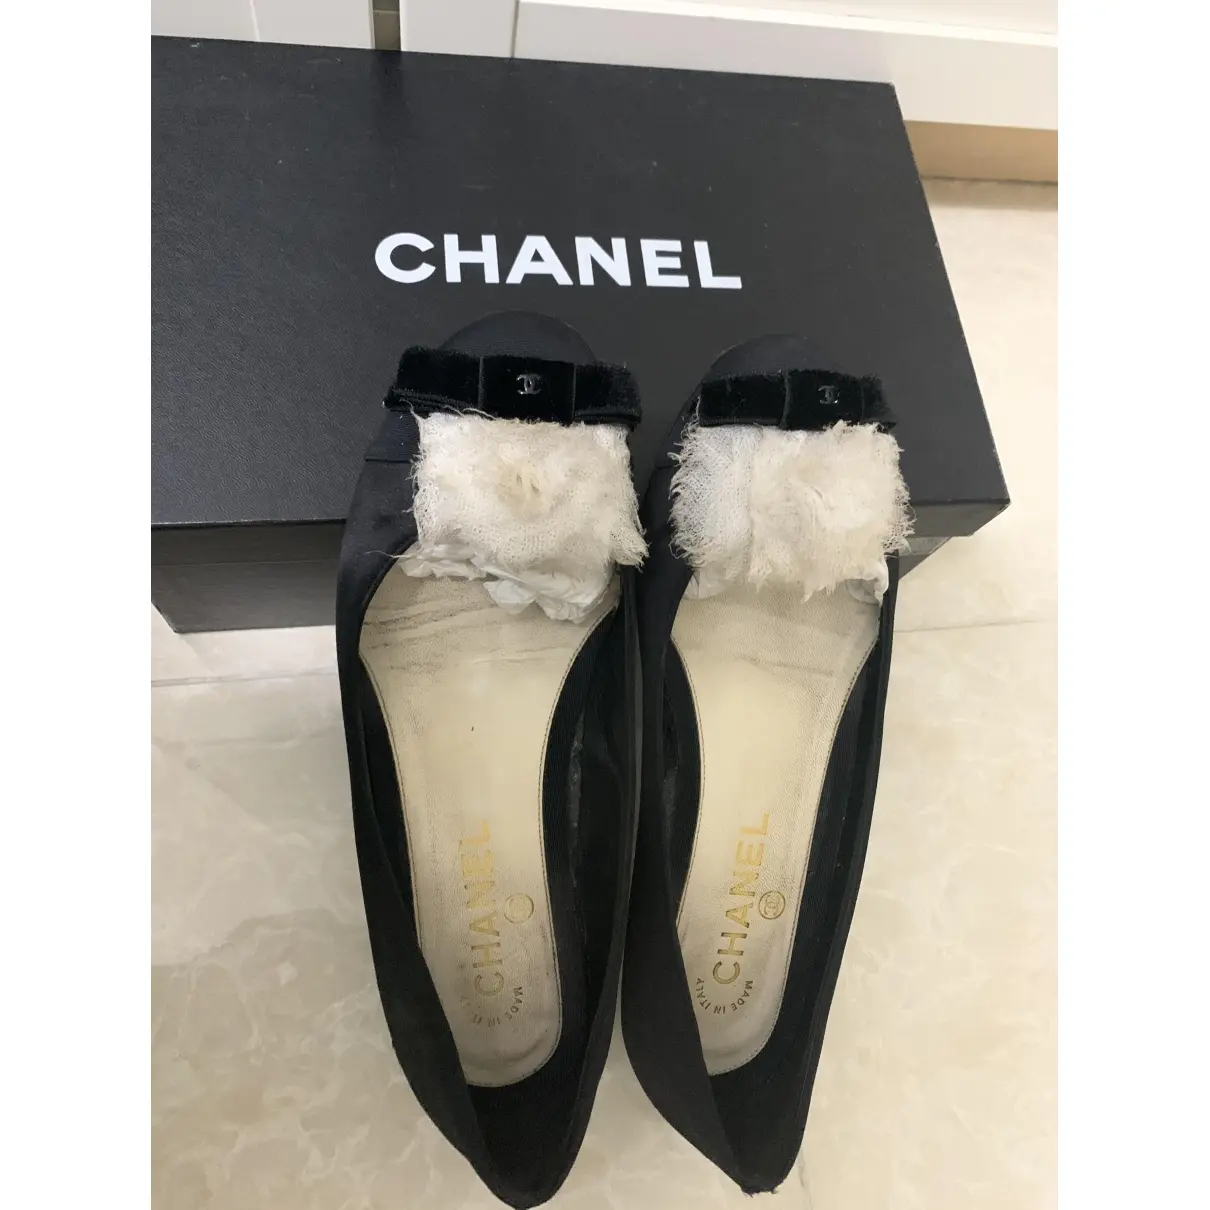 Chanel Ballet flats for sale